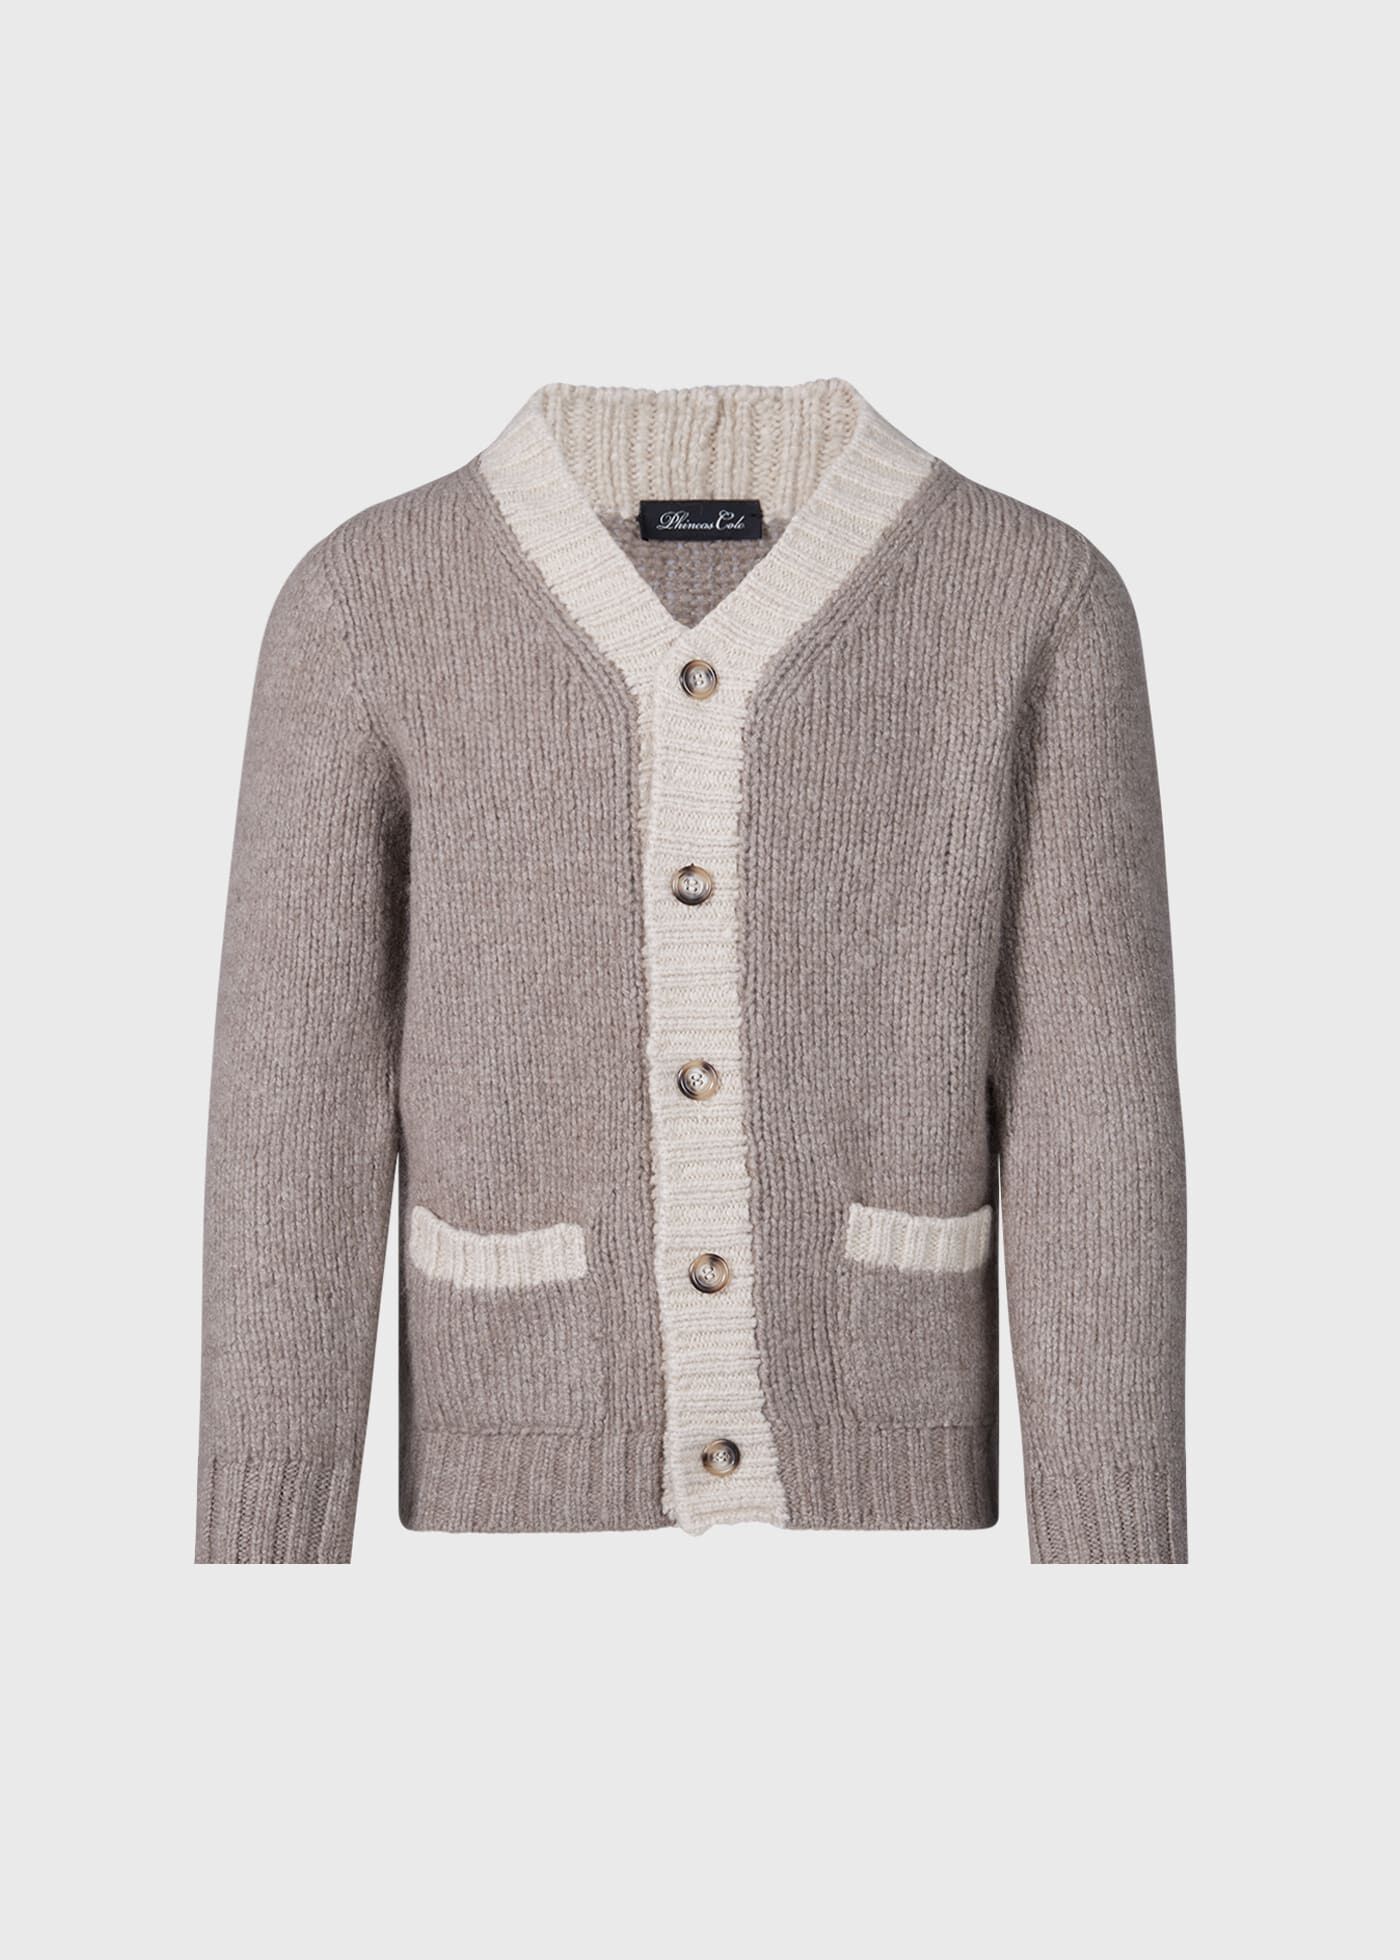 Two Tone Cashmere Cardigan Sweater